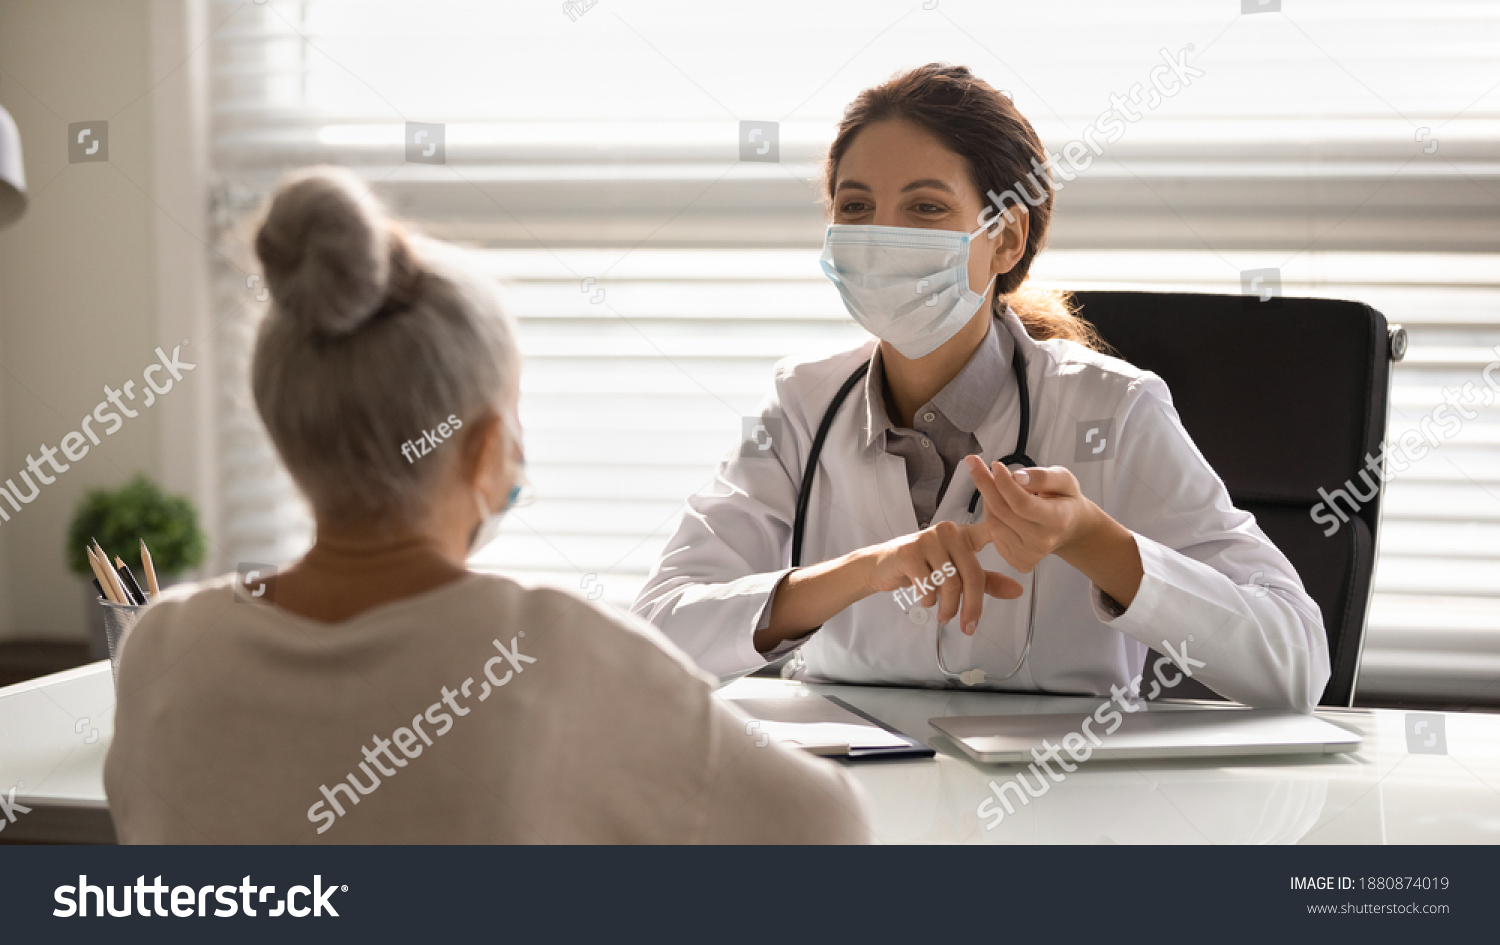 Female doctor in medical facial mask have consultation with elderly patient during covid-19 pandemics. Woman GP in facemask talk consult mature client in clinic or hospital. Coronavirus concept. #1880874019